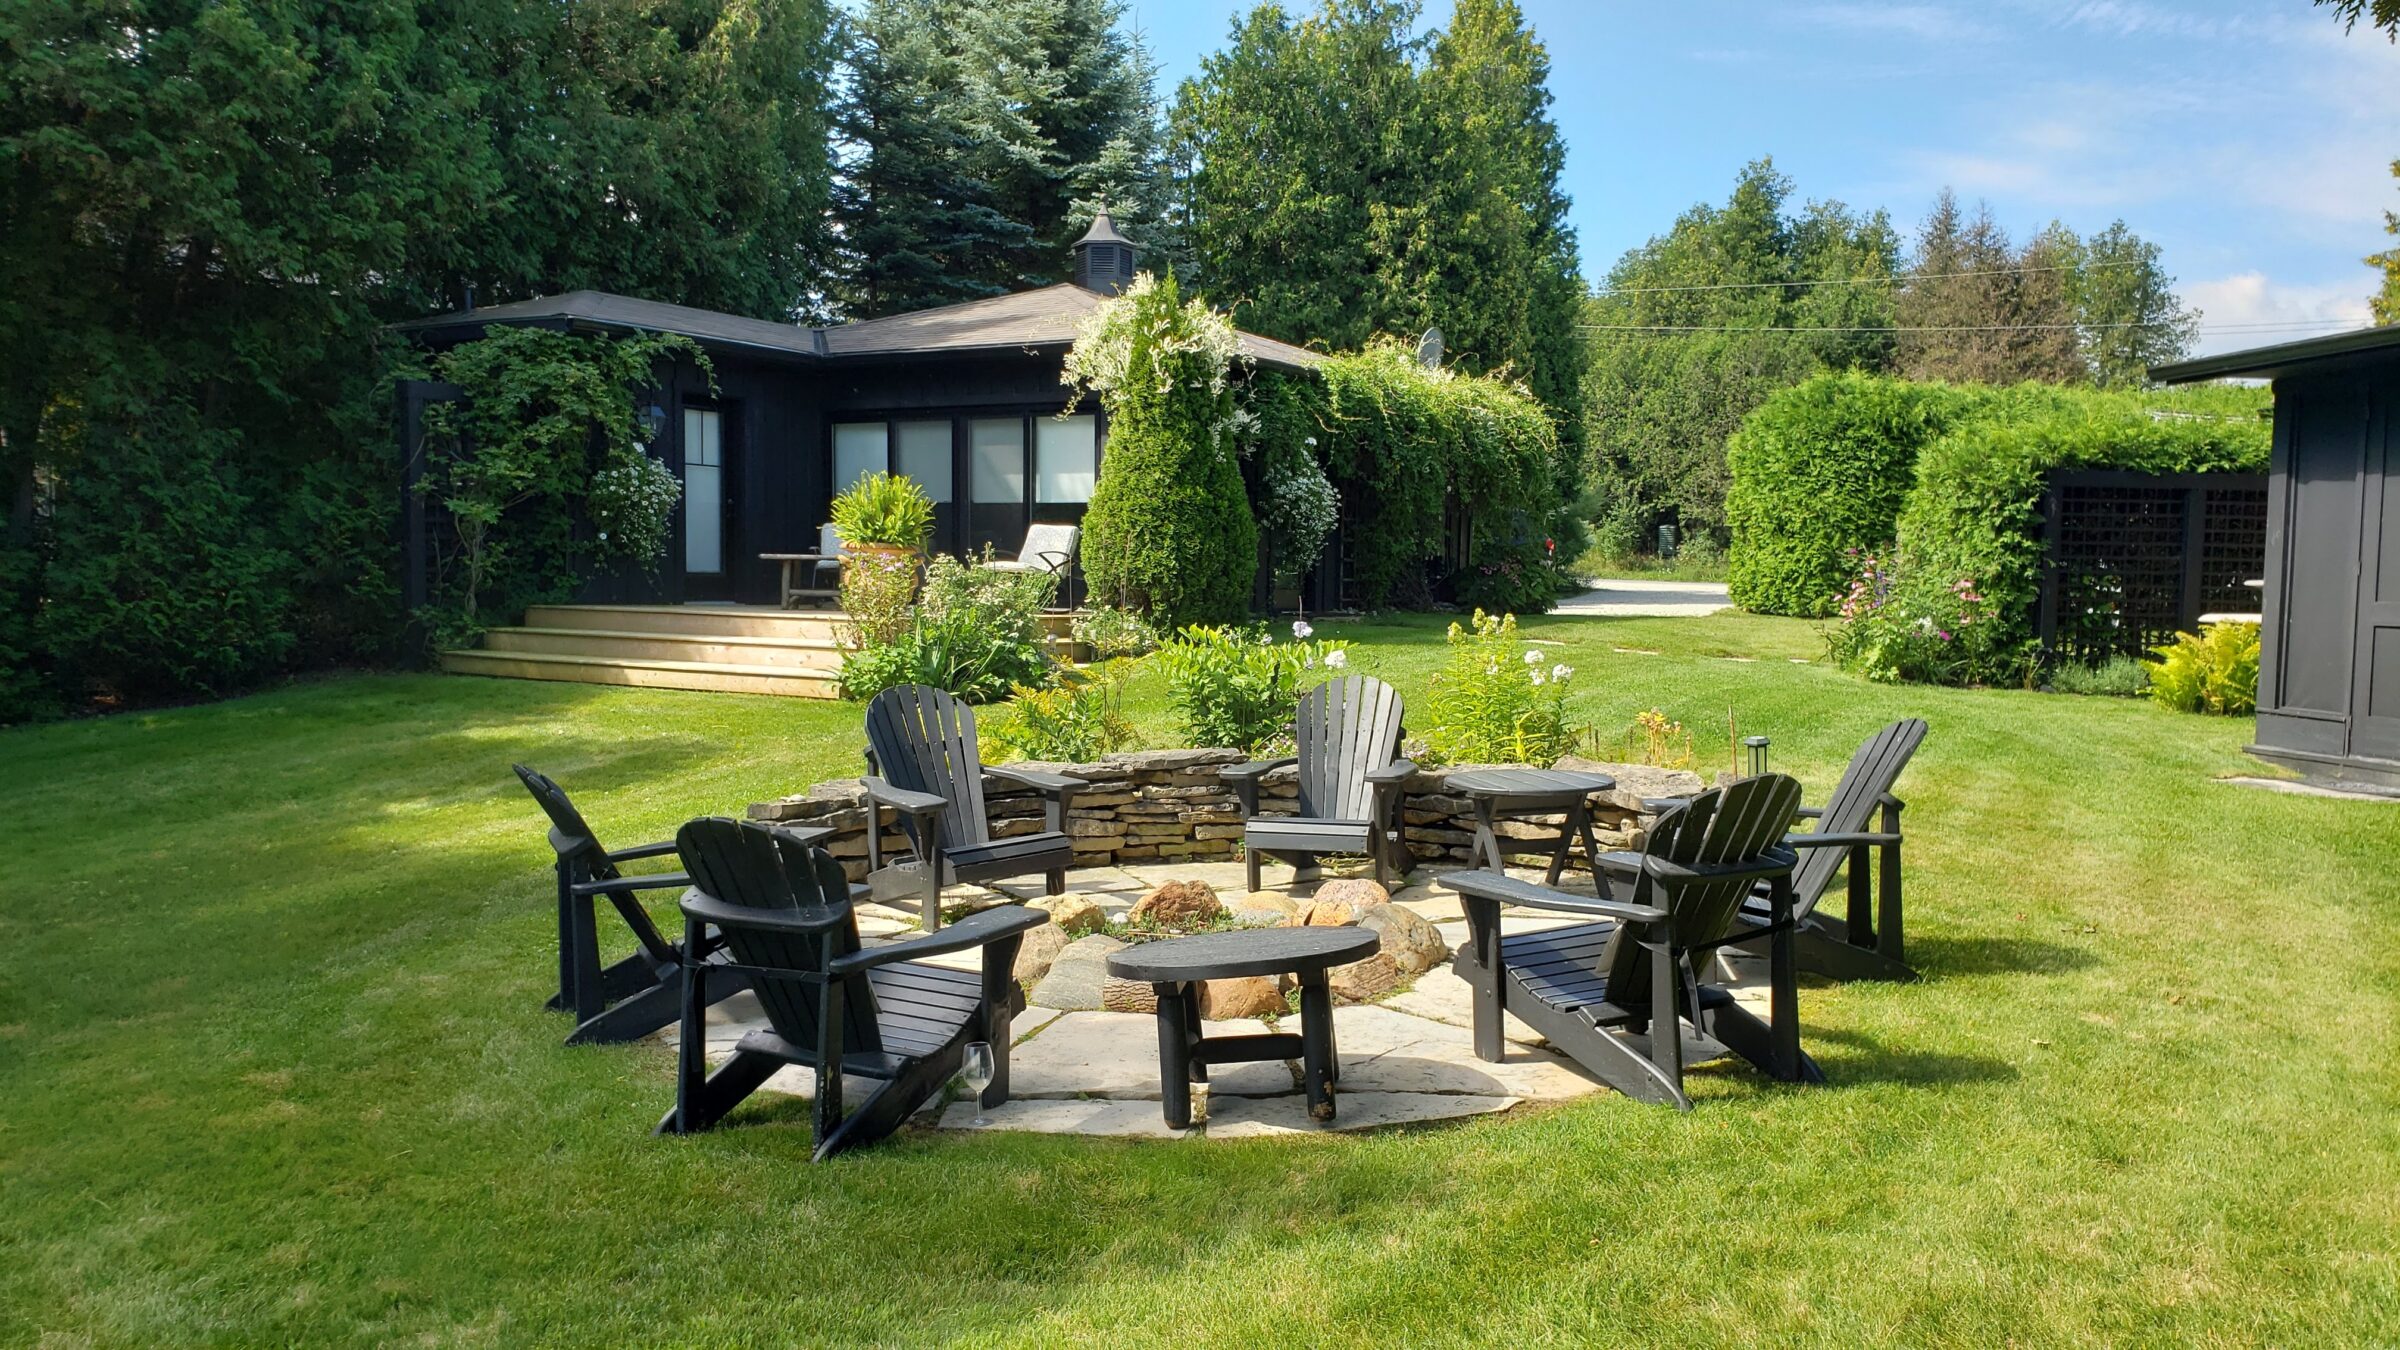 A serene backyard with an inviting fire pit area, surrounded by Adirondack chairs. Well-kept lawn, lush greenery, and a modern black house in the background.